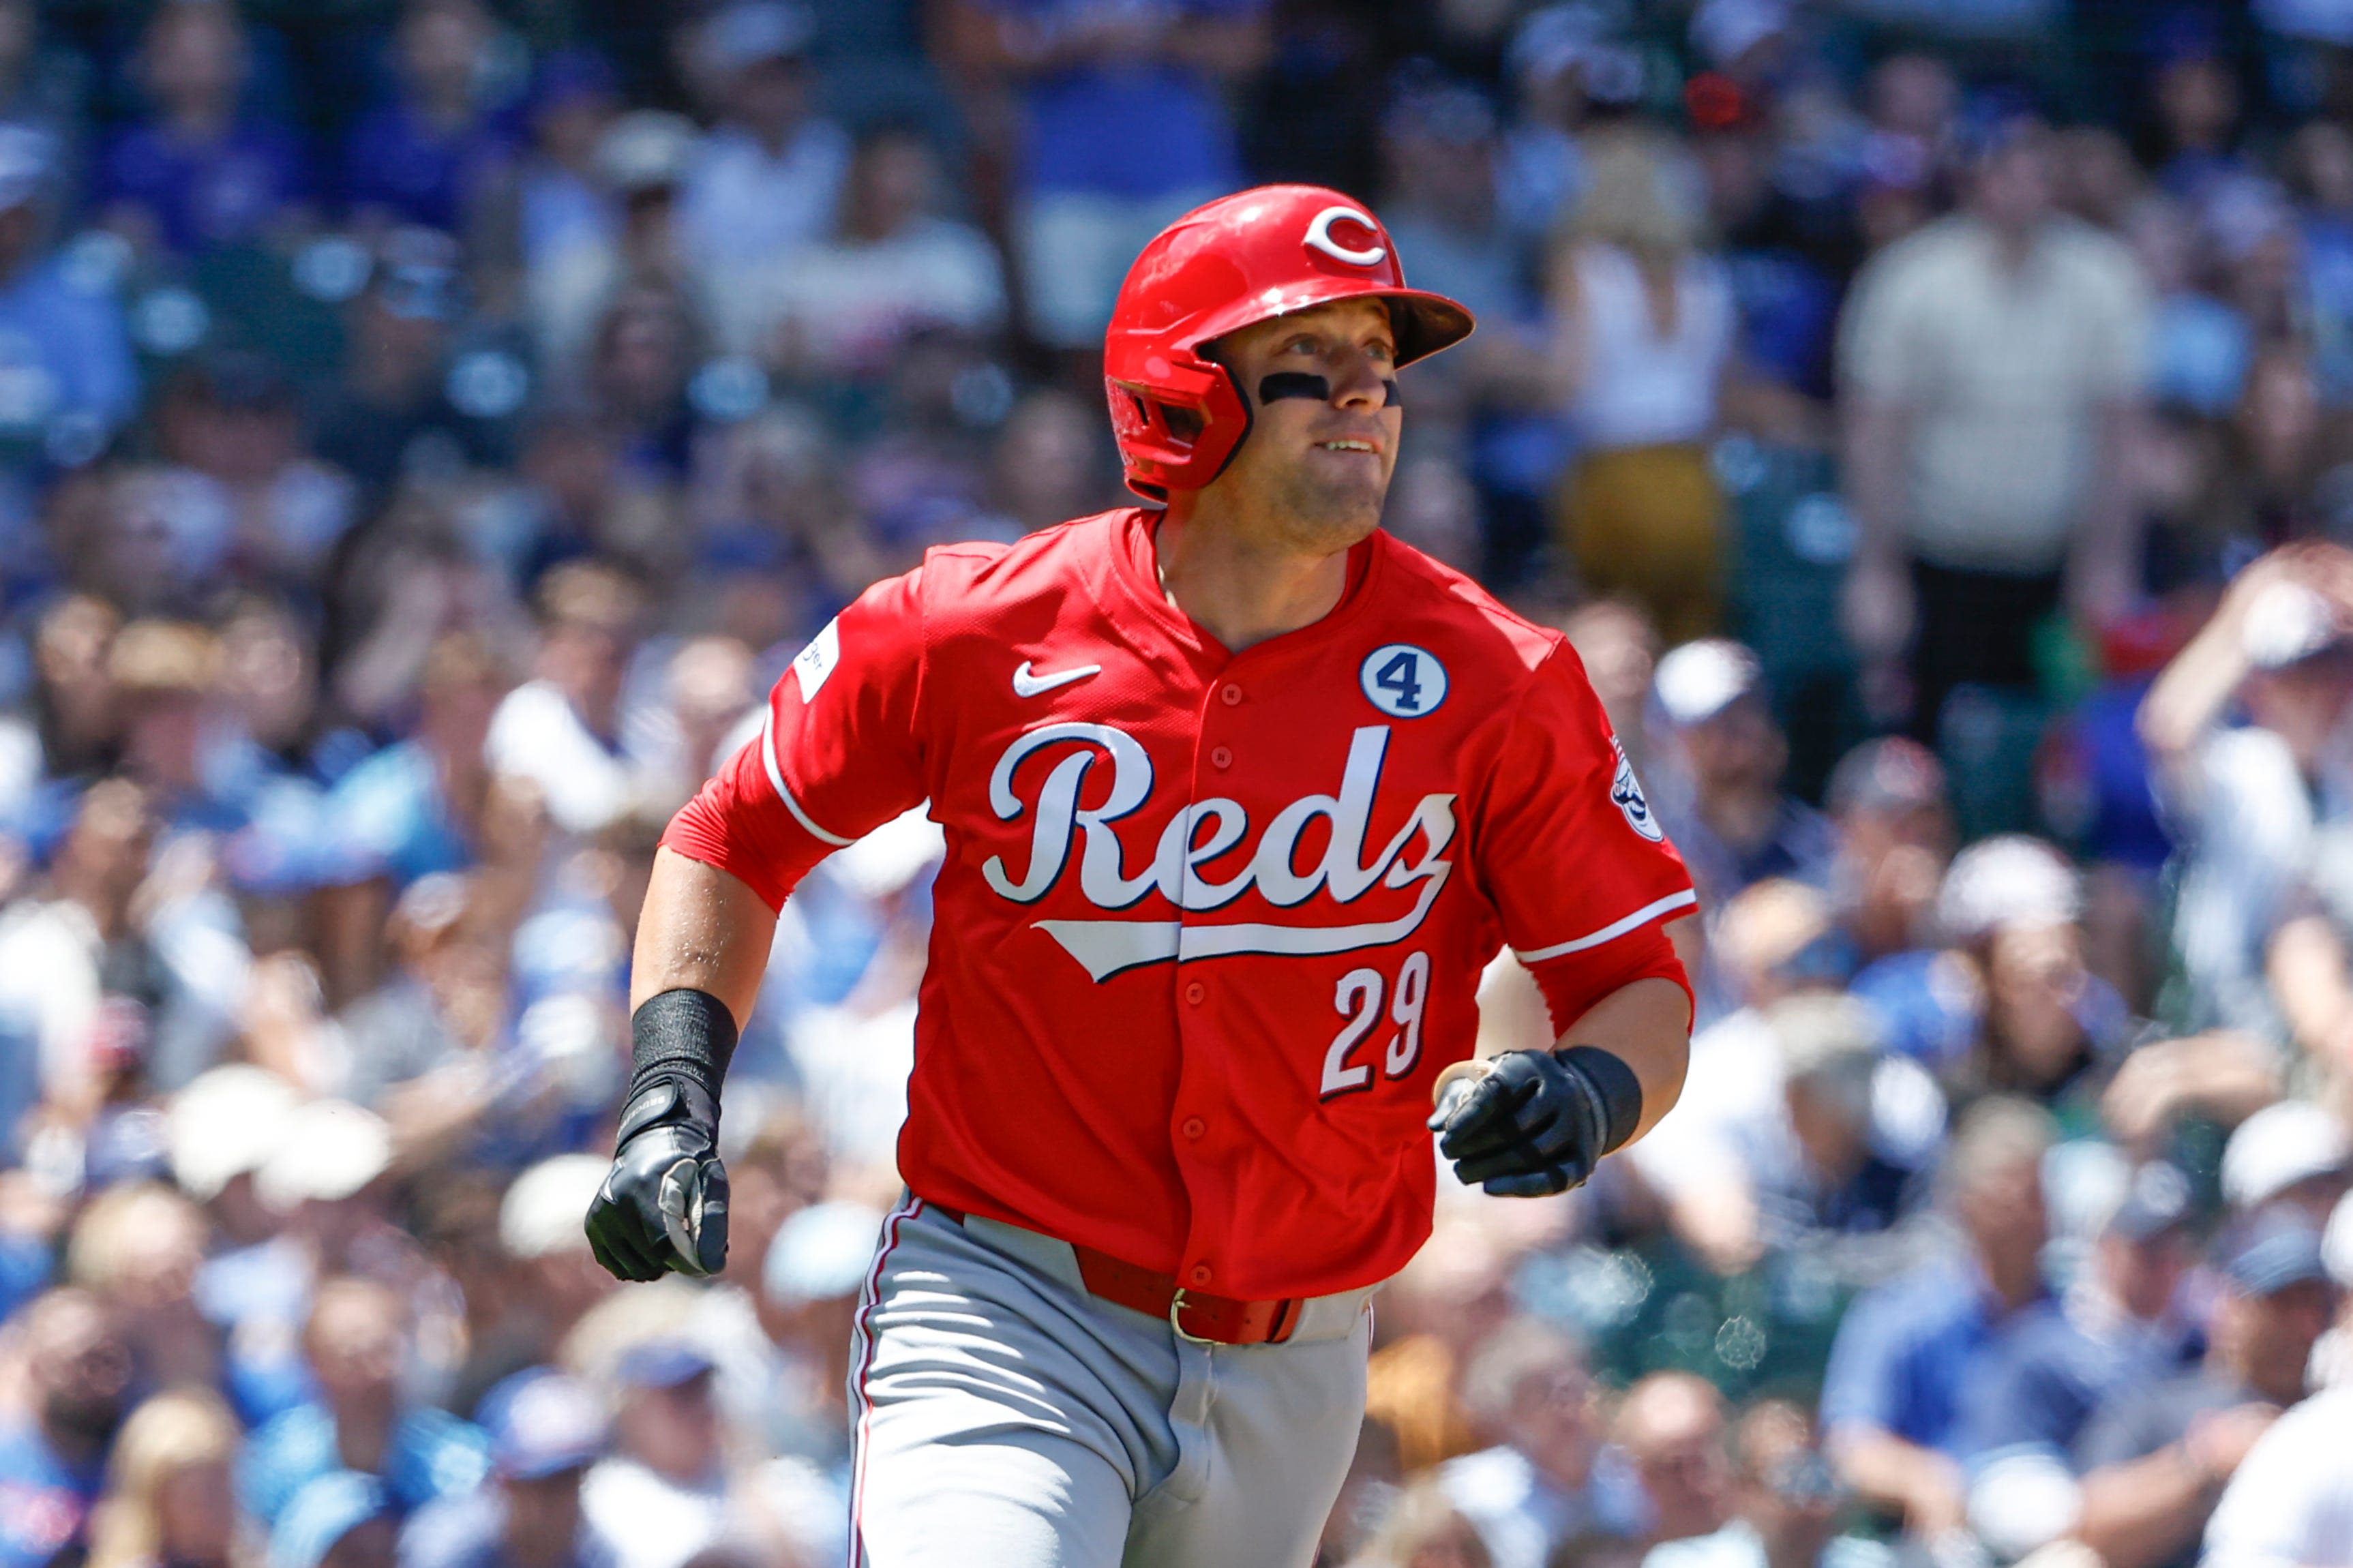 MLB power rankings: See where the Reds rank after series win vs. Cubs